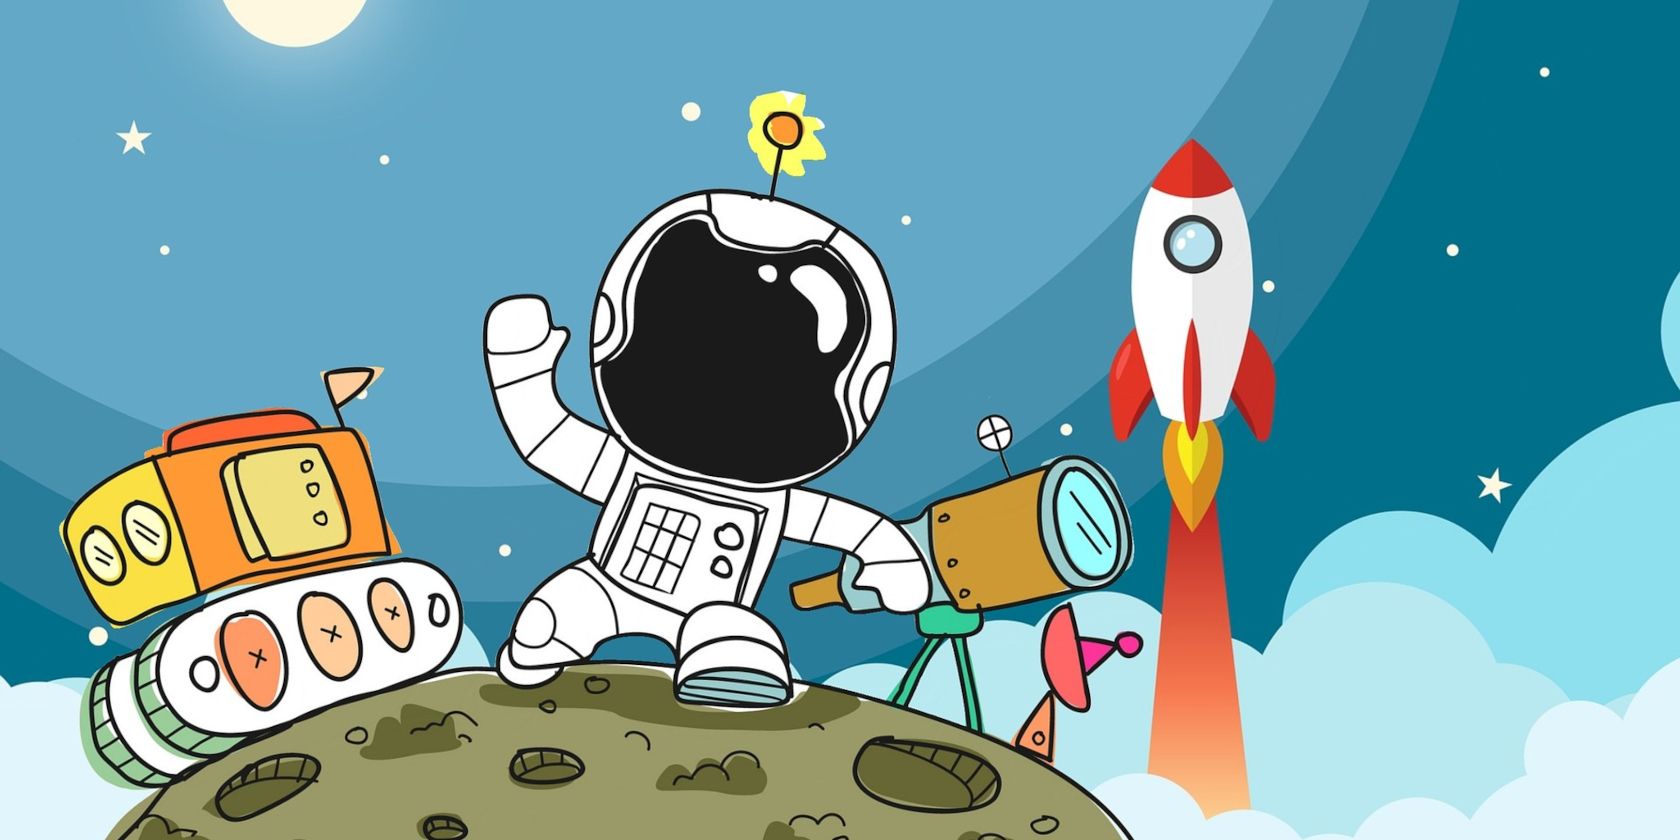 cartoon of an astronaut on the moon, with rocket, telescop, and a tracked vehicle